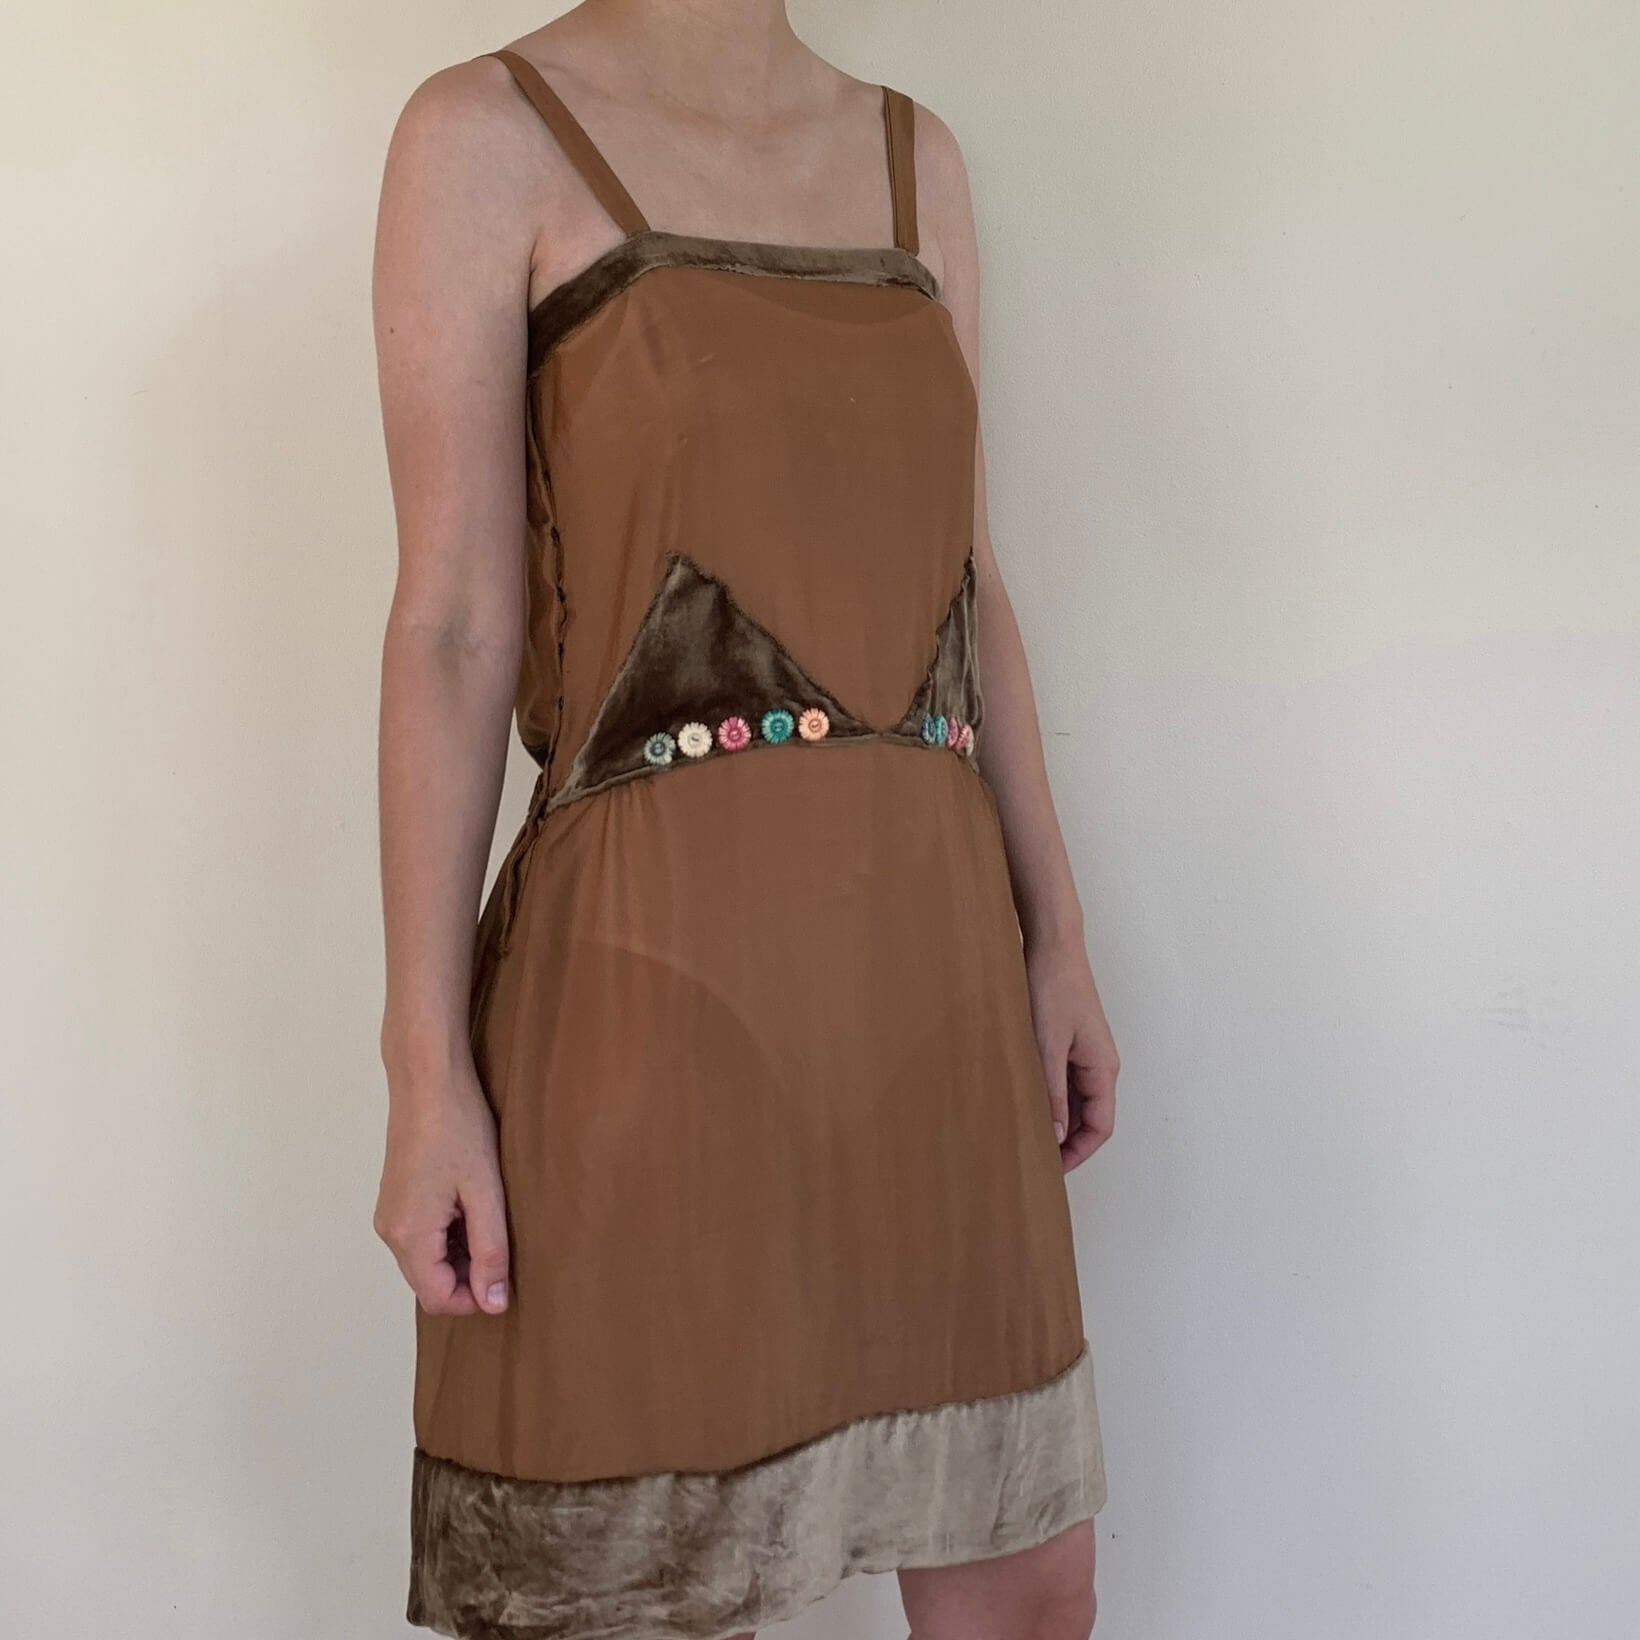 additional view of the dress worn on a model